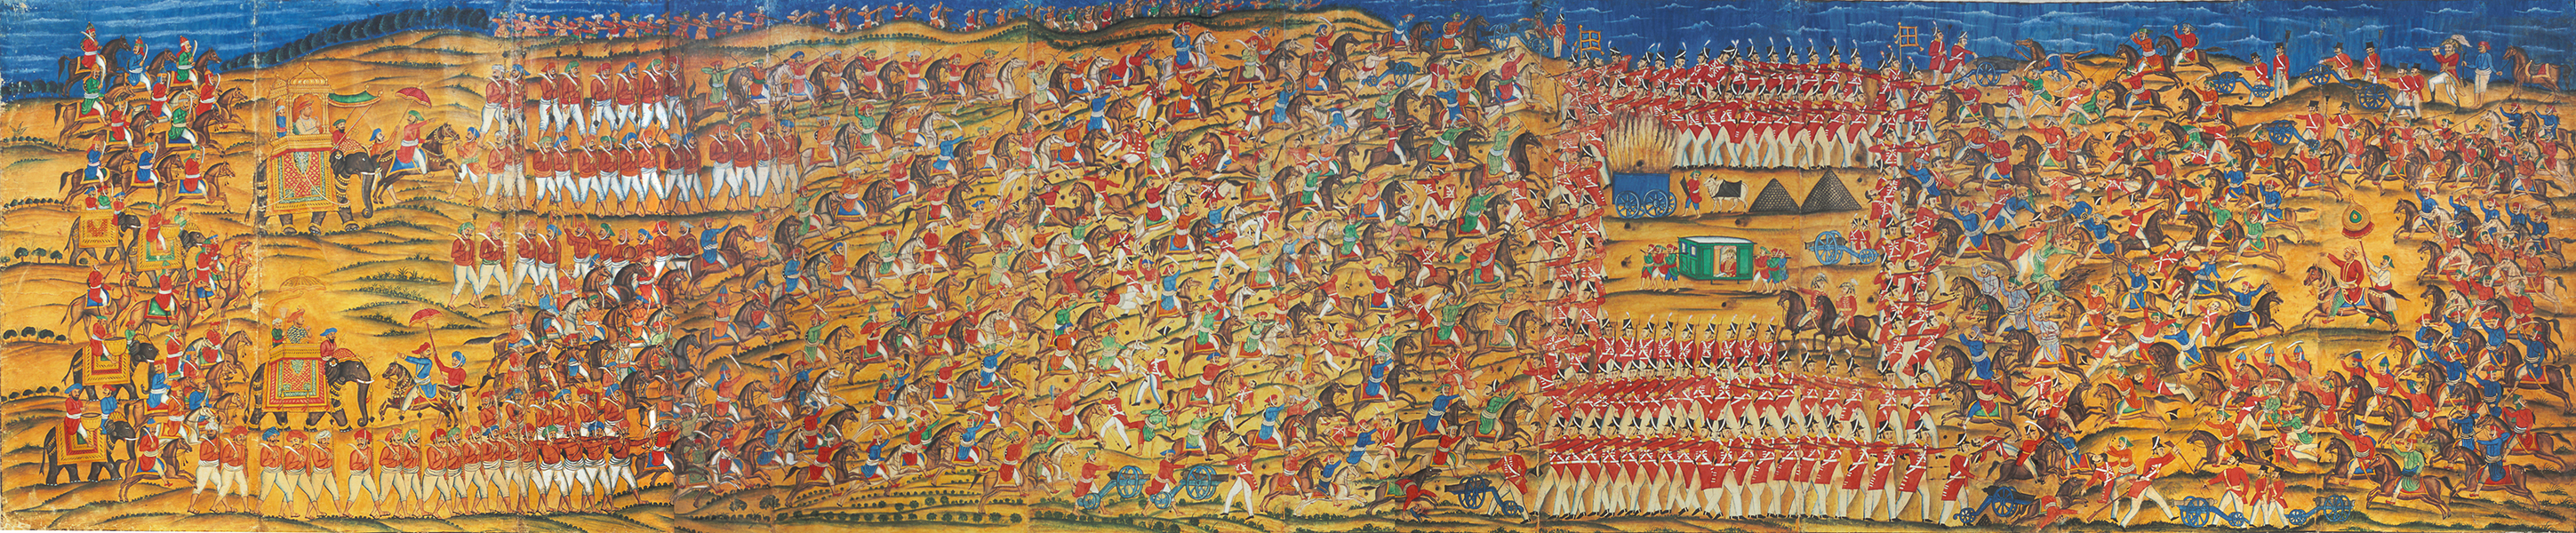 Tipu Sultan commissioned The Battle of Pollilur for the Daria Daulat Bagh to monumentalize his victory; early 19th-century, gouache on paper, 10 sheets of paper on canvas, mounted on restoration fabric, 962 × 200 cm, private collection.